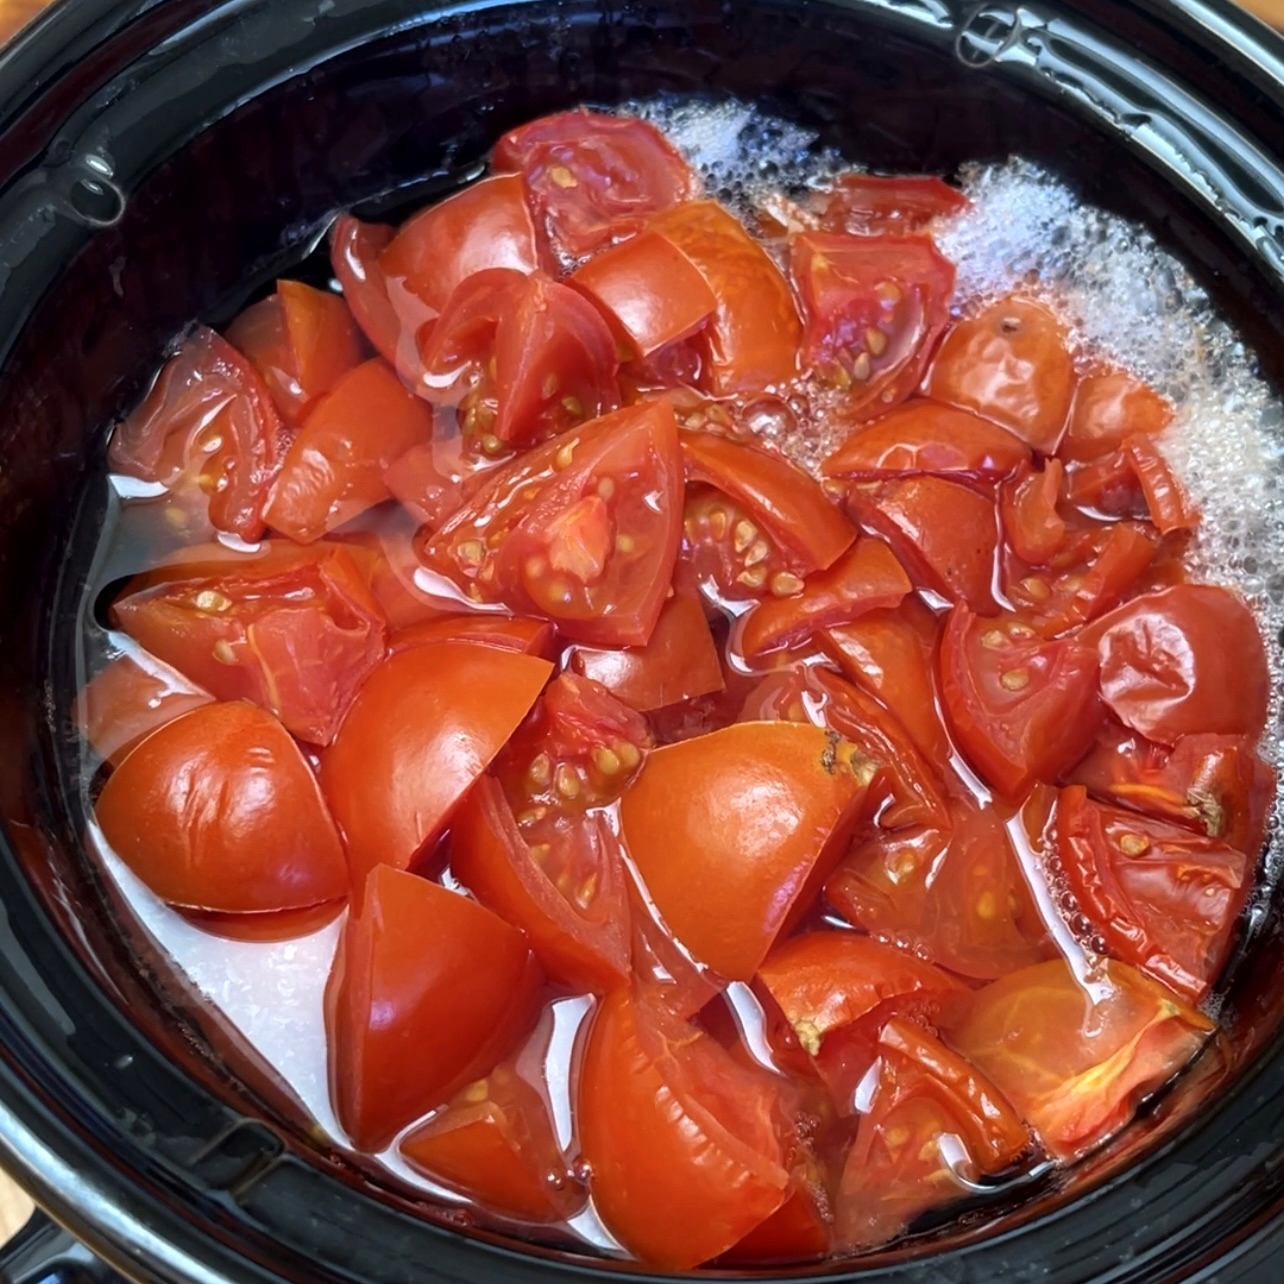 Chopped fresh tomatoes in a small black slow cooker crock have cooked down and softened